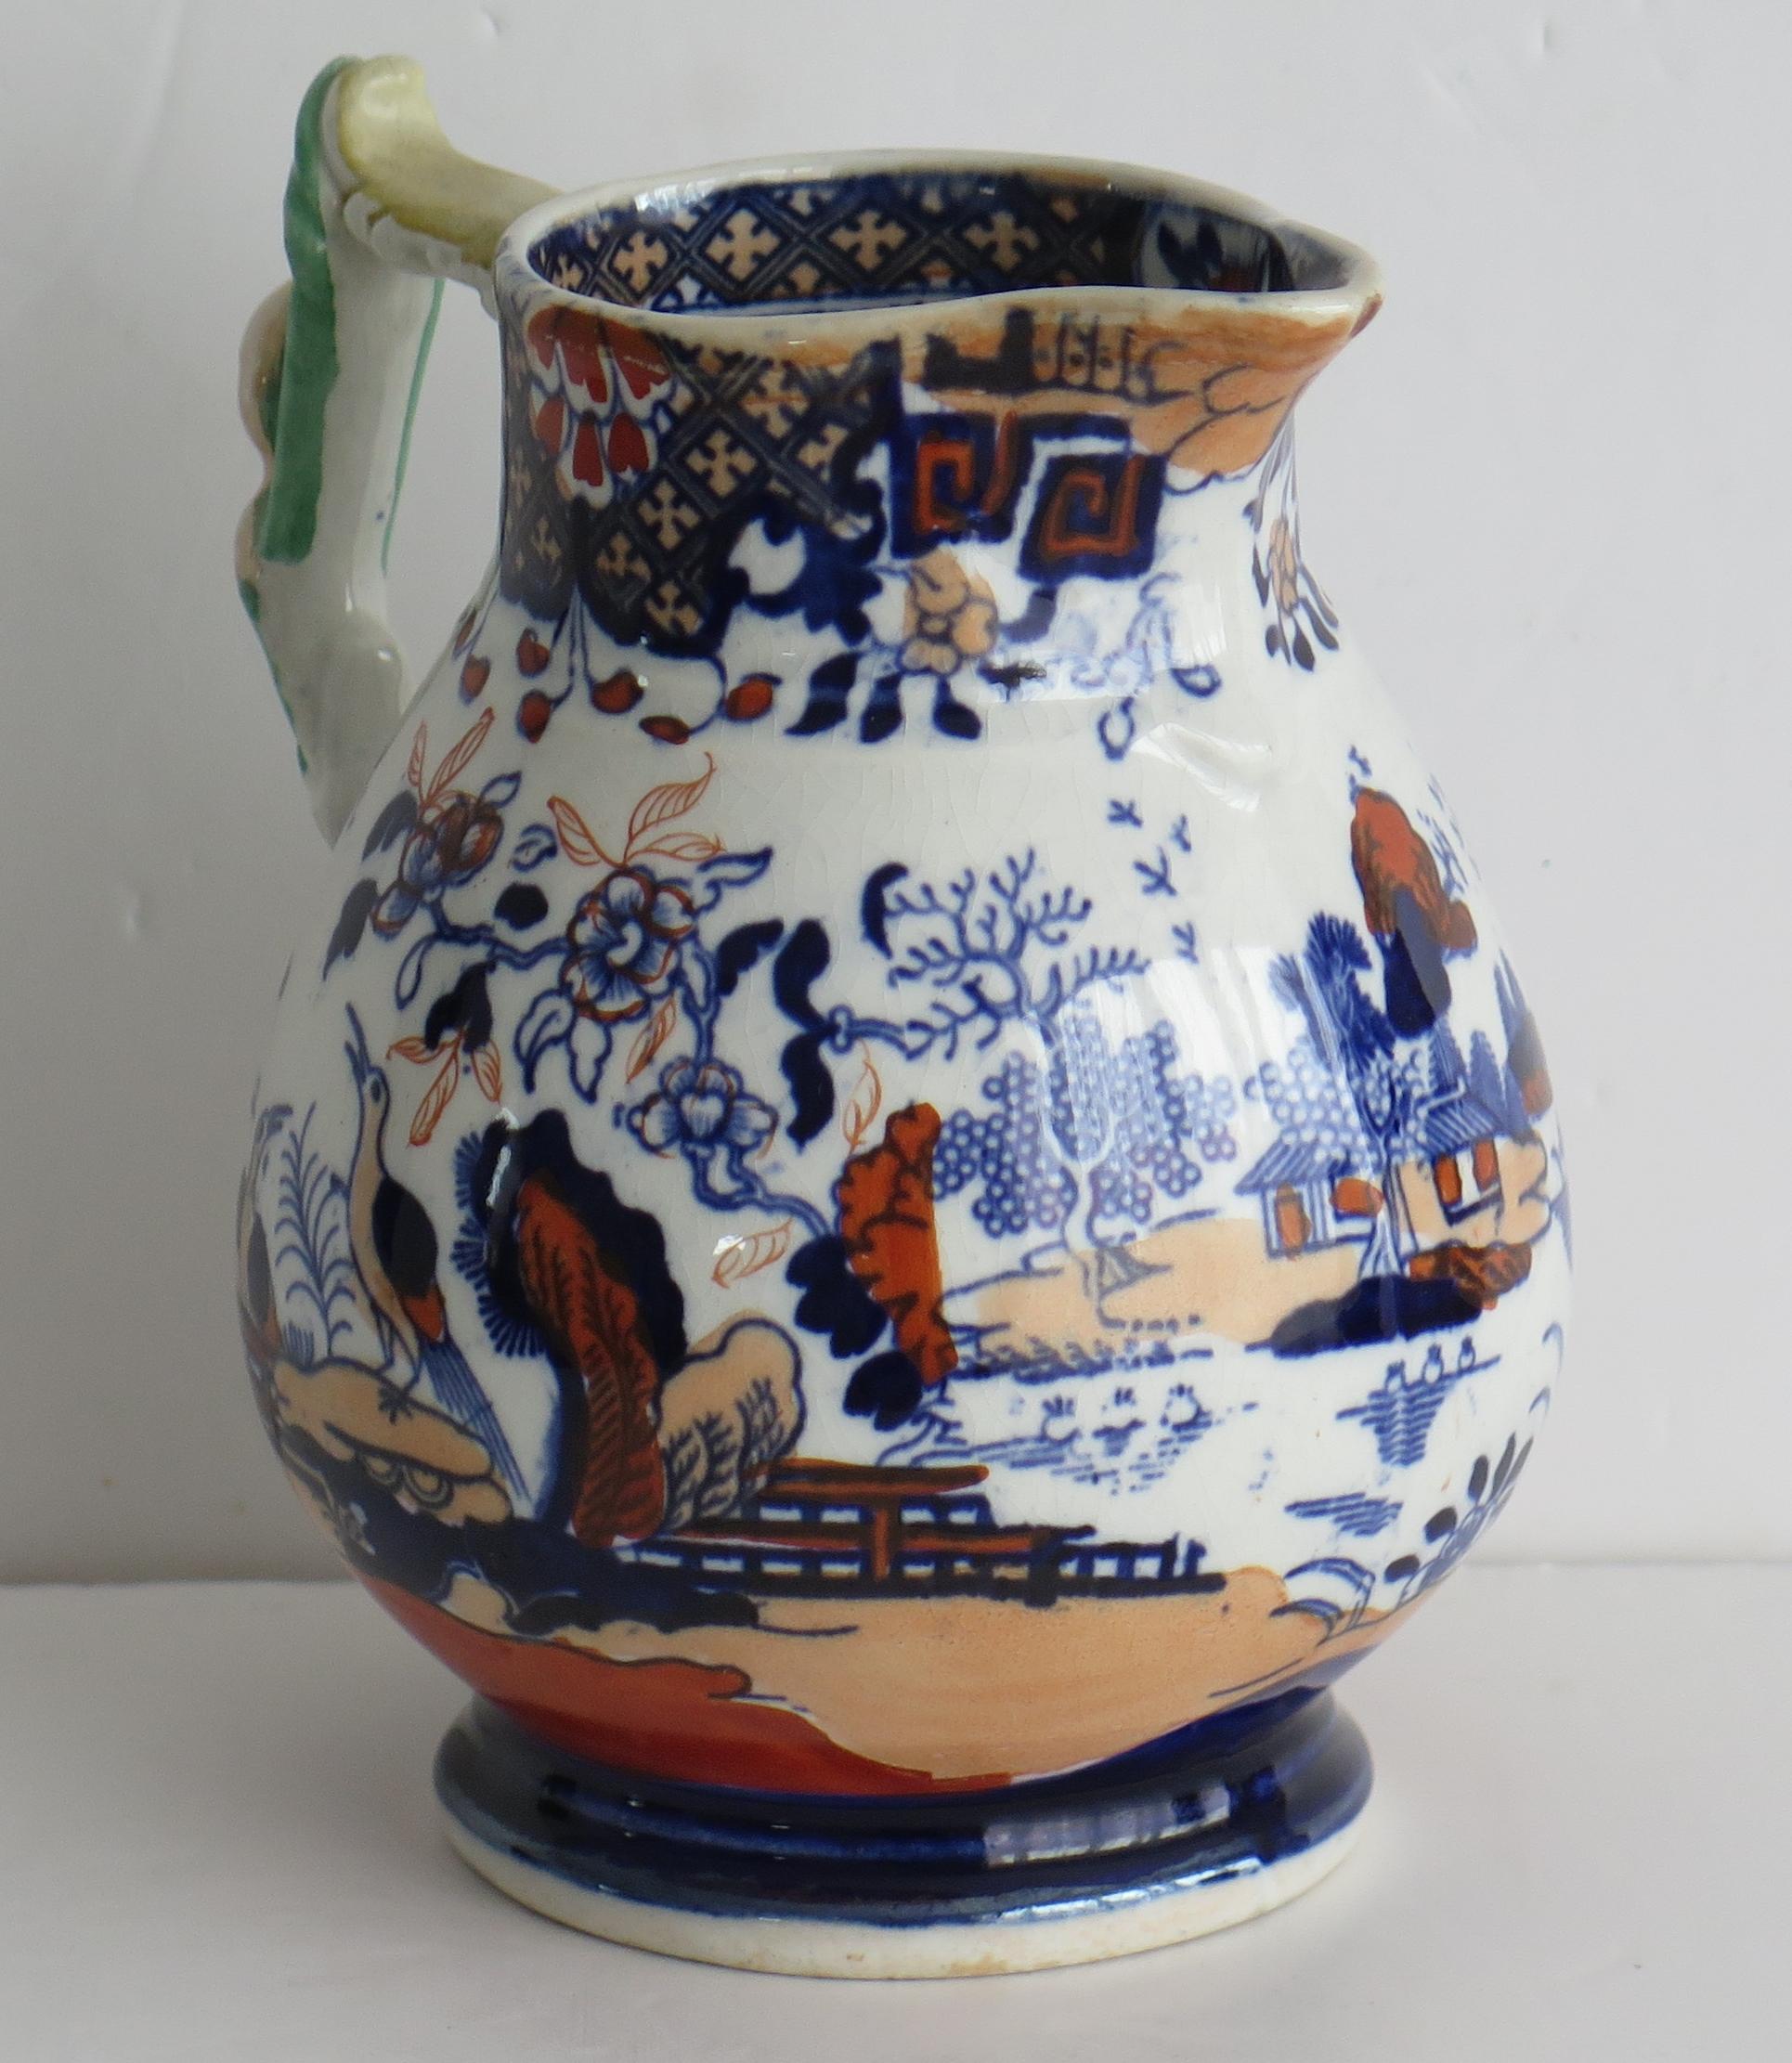 This is a very good rare shaped jug or pitcher, made by Mason's Ironstone, England in the Rare Heron pattern and fully marked to the base, dating it to circa 1830

The jug has a rare shaped baluster form on a low foot and an unusual loop handle